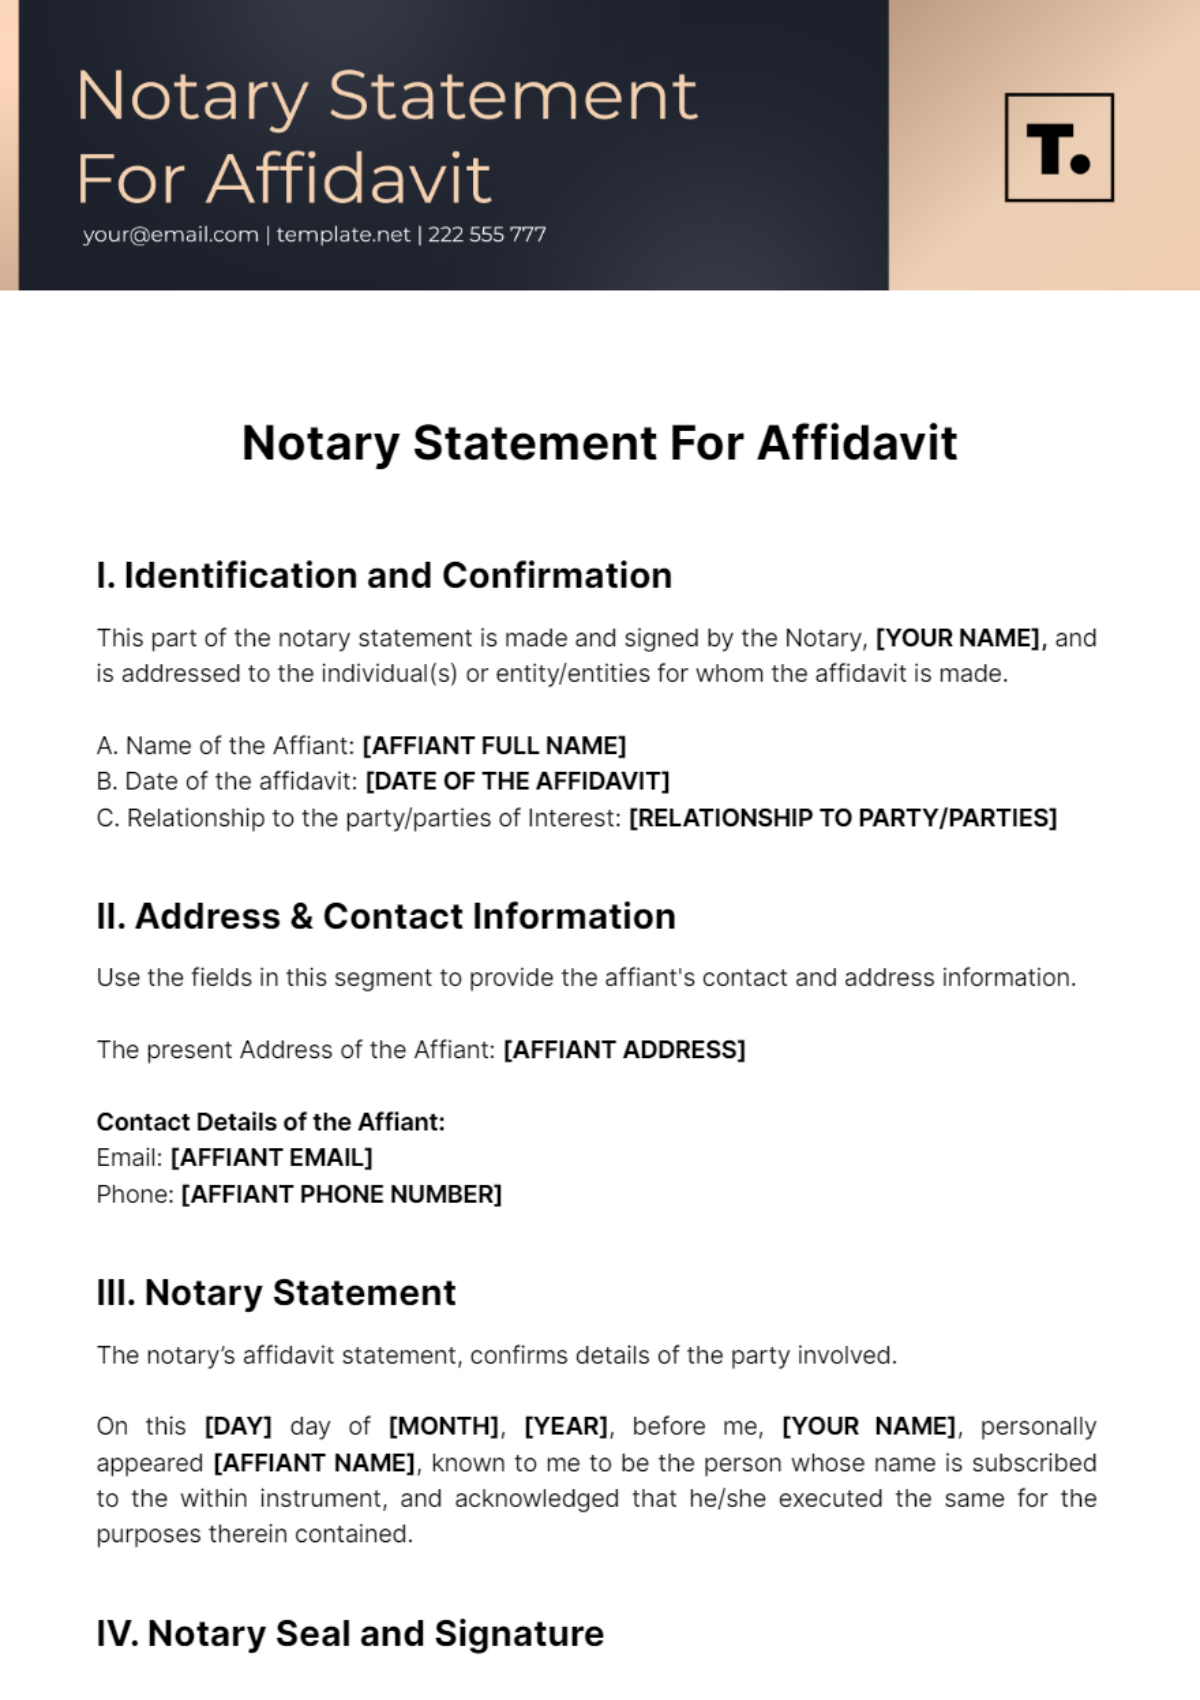 Notary Statement For Affidavit Template